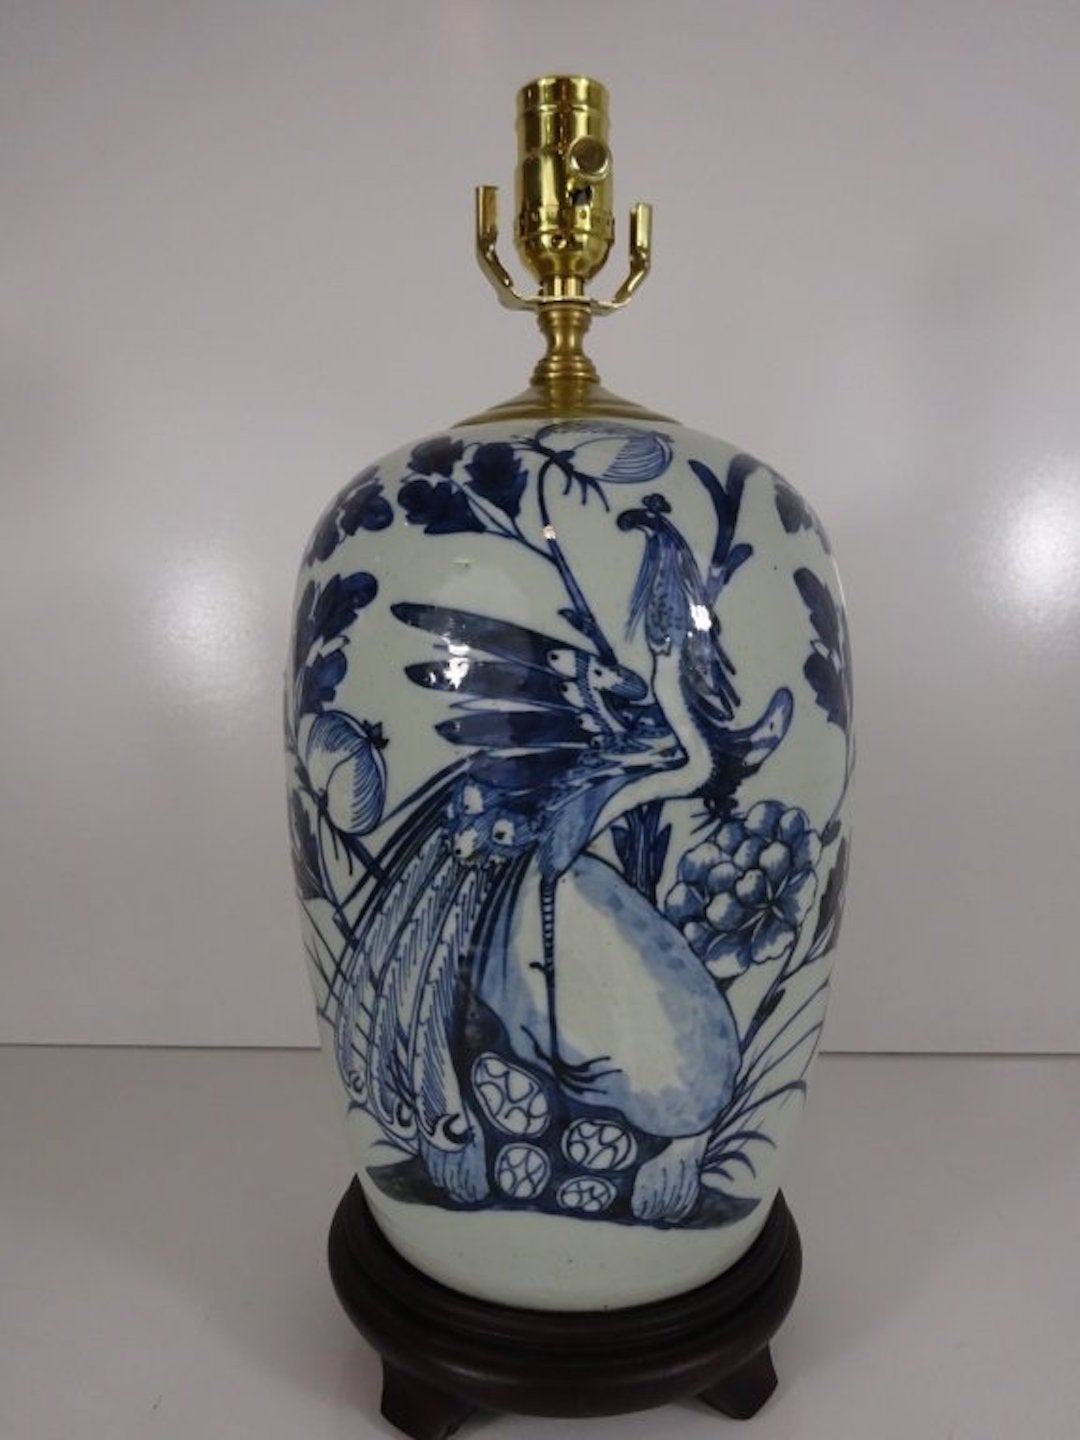 Pair of Chinese Export Blue and White Vases, Now as Lamps. Each one decorated in the Canton style with Bird and floral motif, the backs are not decorated. Each one raised on a carved wood stand, Height to top of Jar is 14